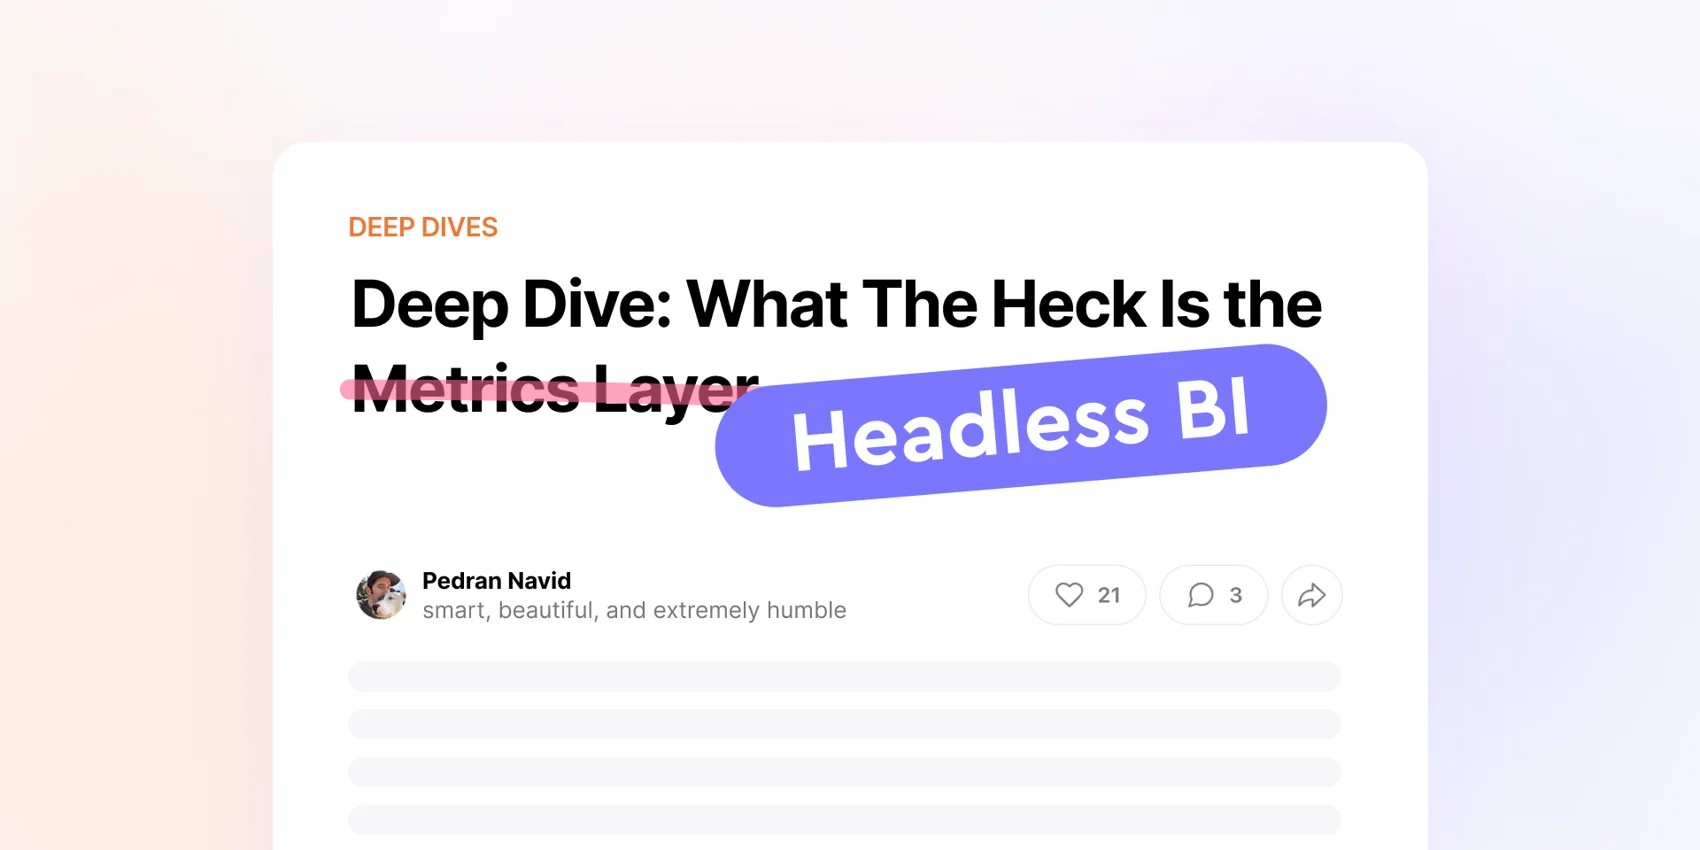 Cover of the 'Deep dive: What the heck is the Headless BI' blog post